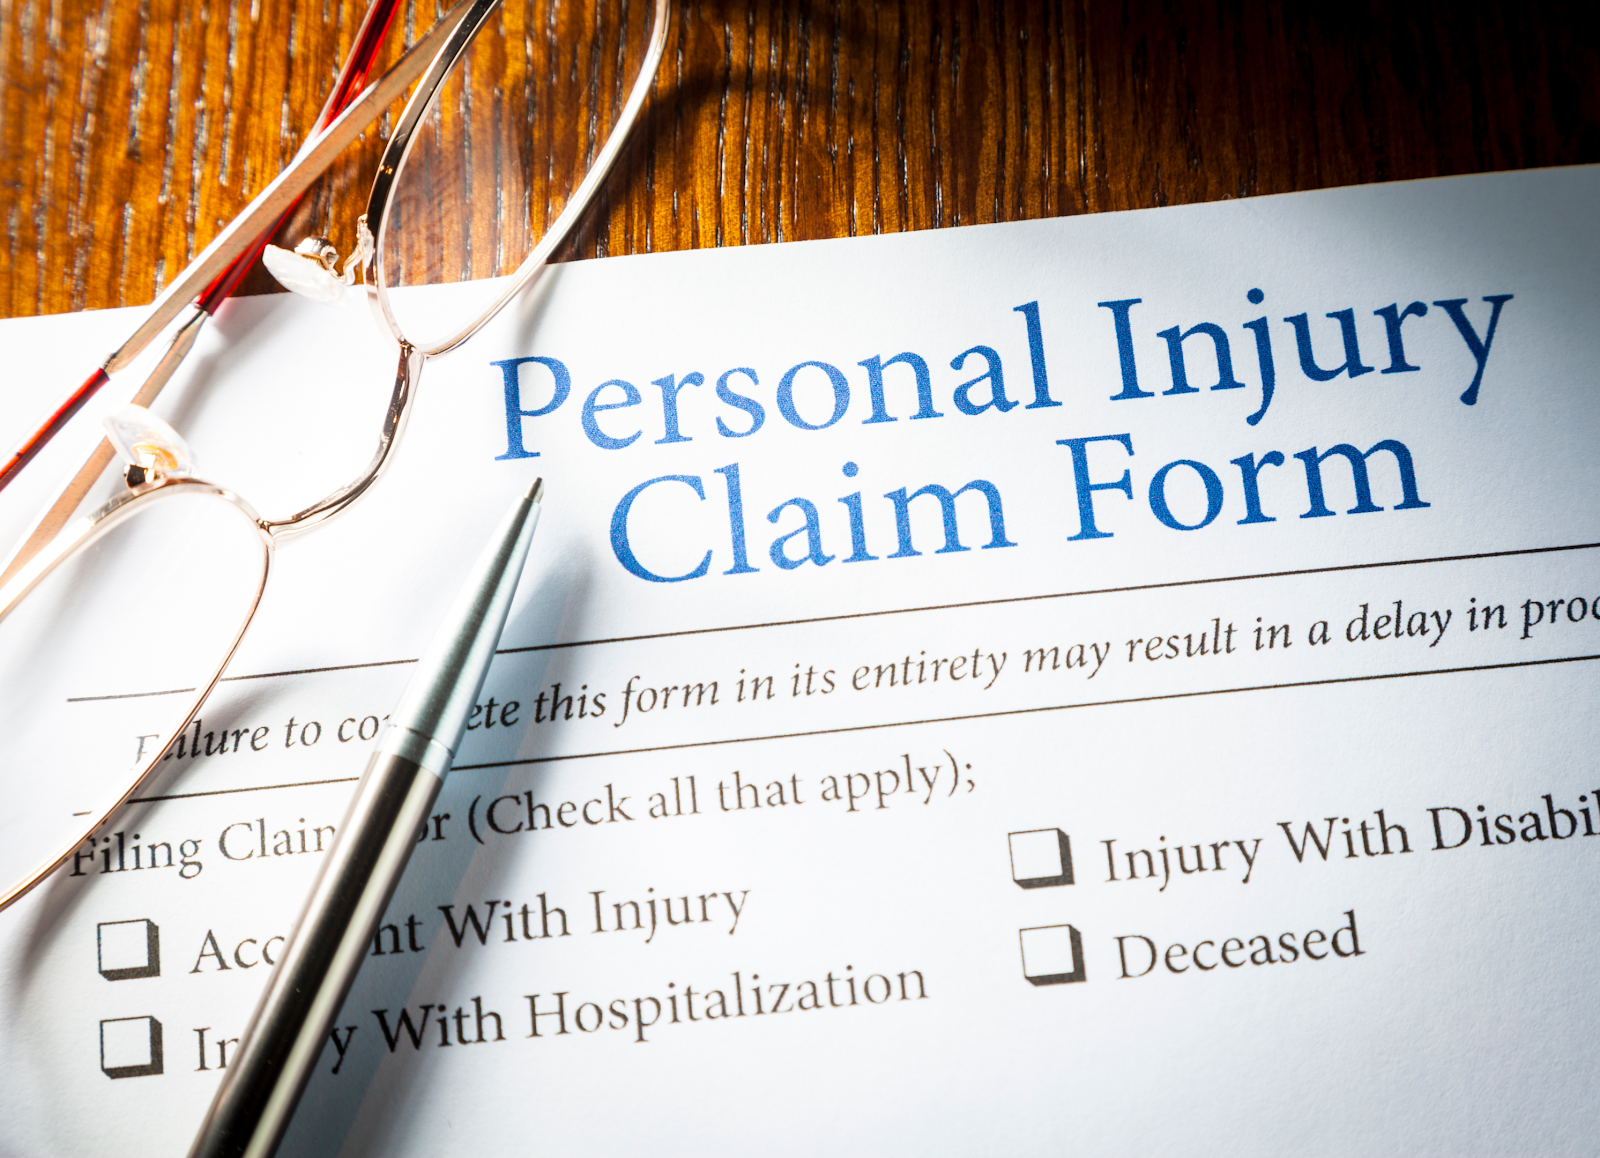 personal injury claim form sitting on a table for personal injury attorneys to sign with their clients